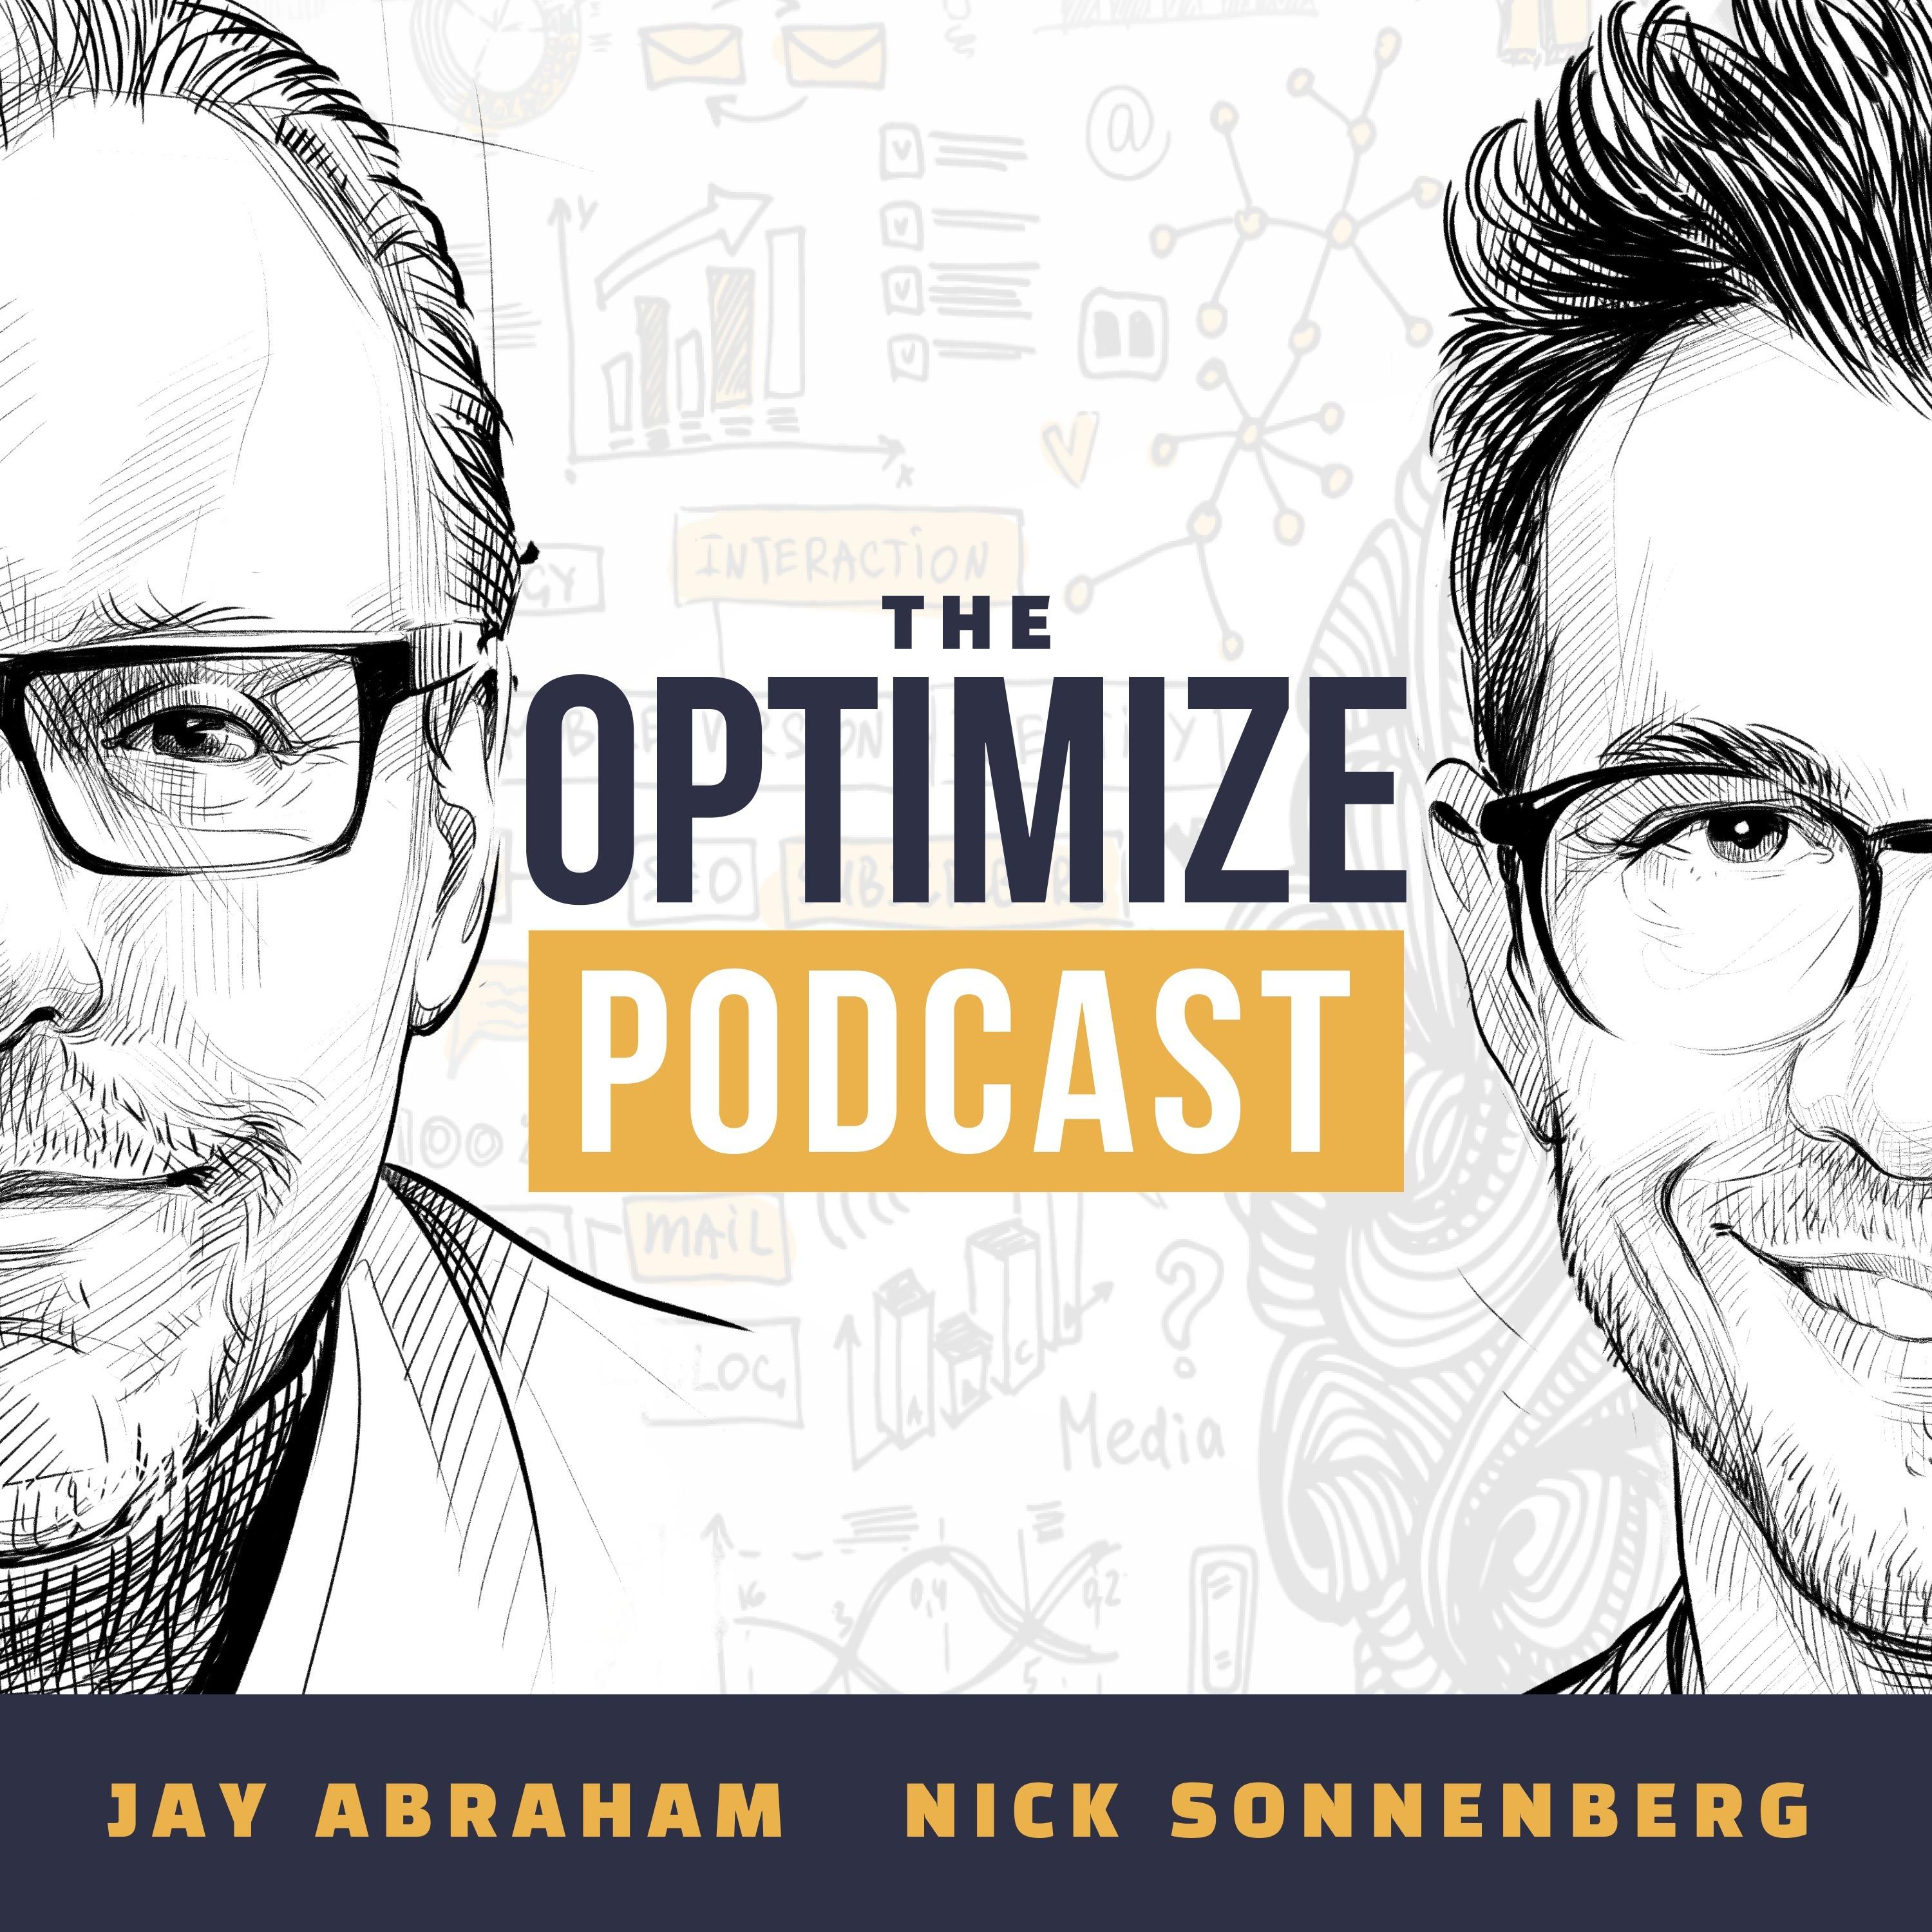 The Optimize Podcast